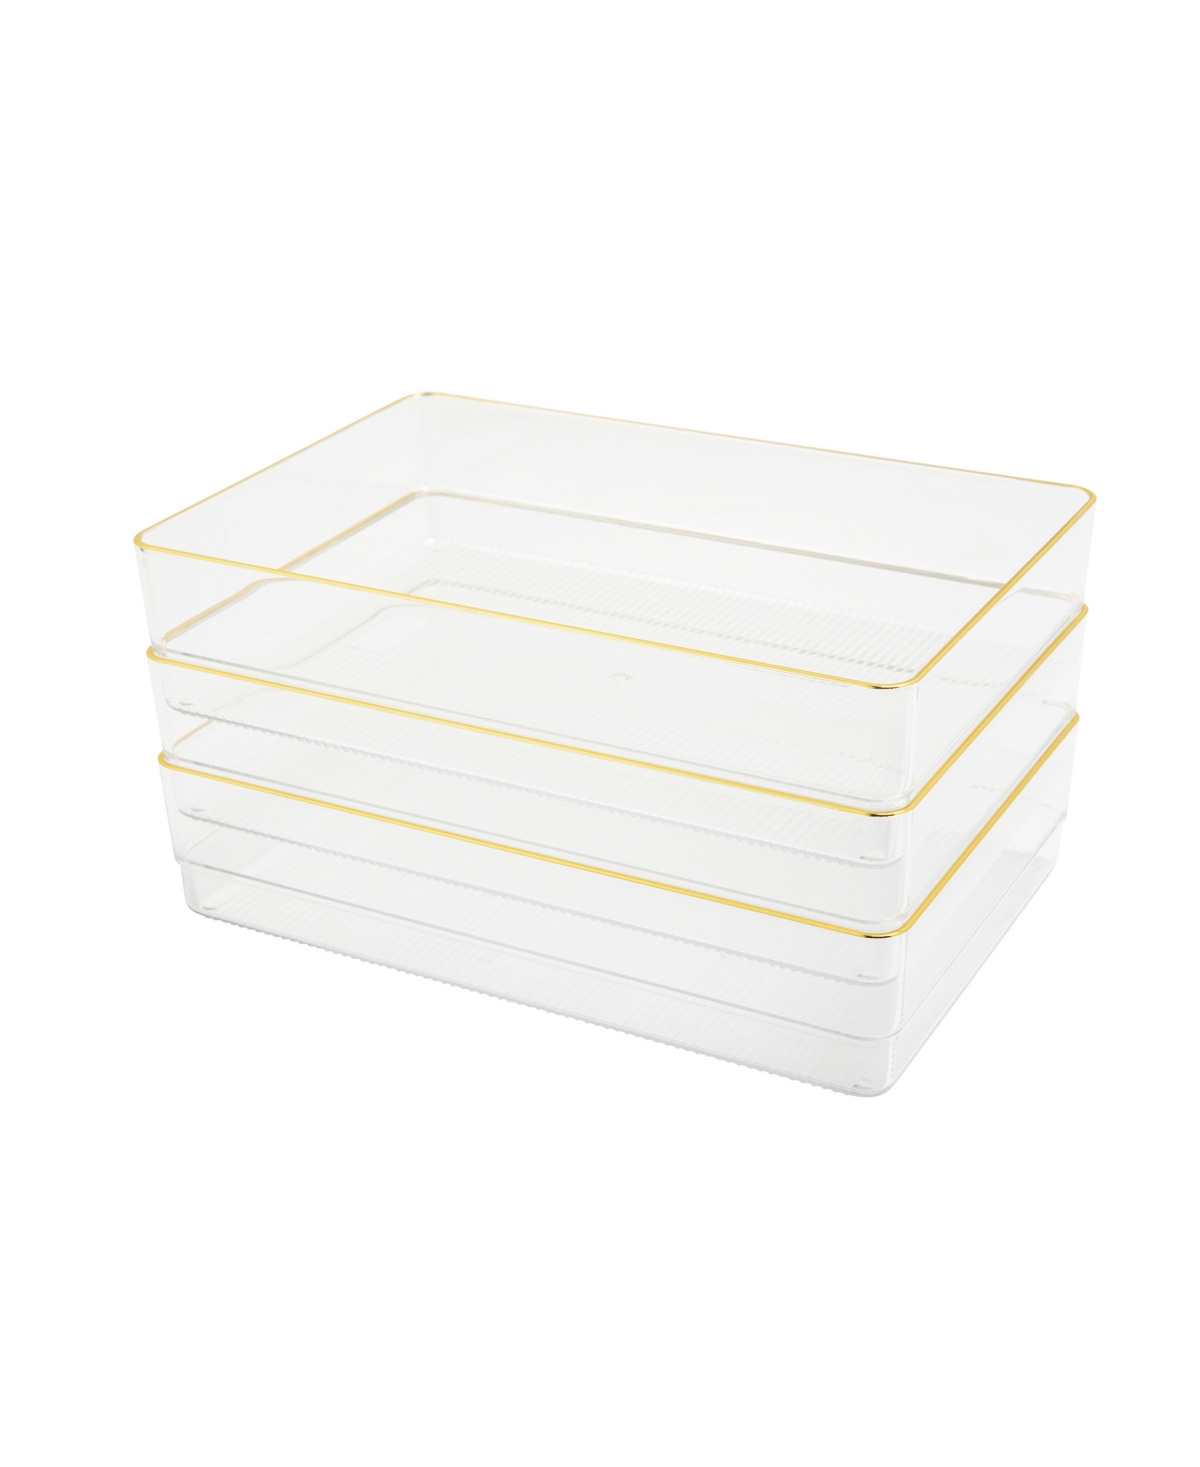 Kerry 3 Piece Plastic Stackable Office Desk Drawer Organizers, 9" x 6" - Clear, Gold Trim